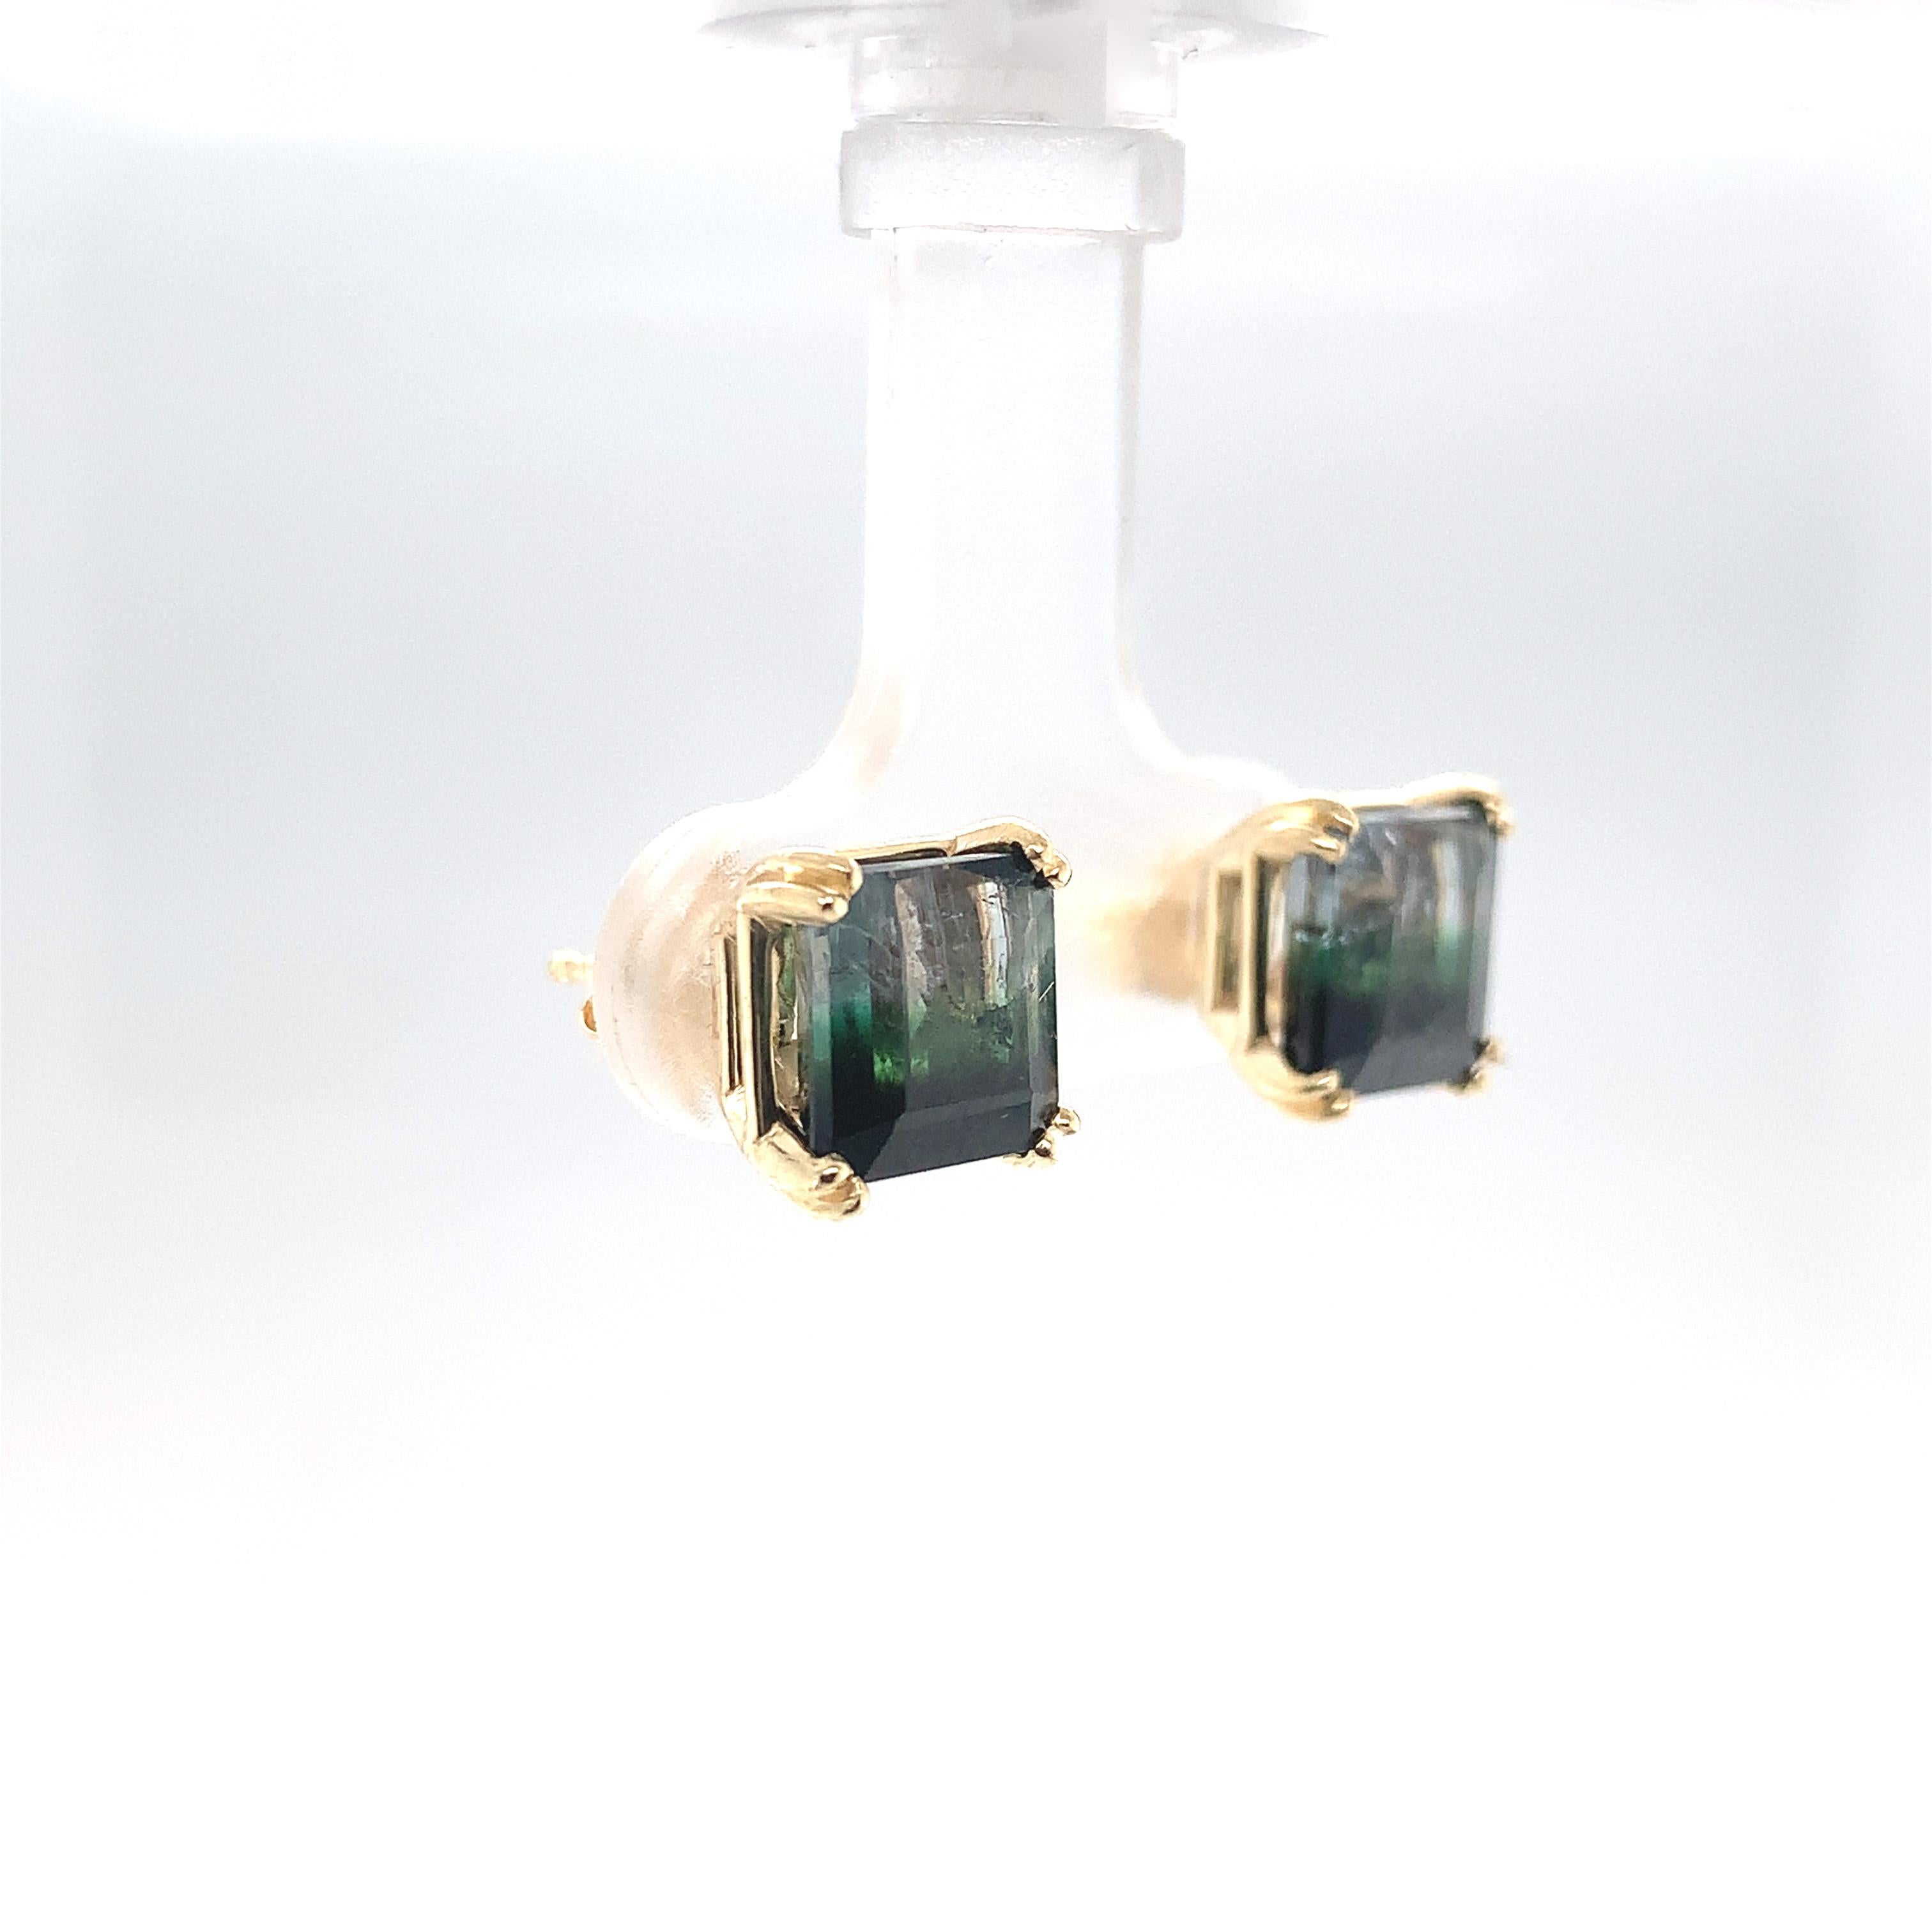 Pair of 14K Yellow Gold Bi-color 4.27 carat tw Tourmaline Stud Earrings In Excellent Condition For Sale In Big Bend, WI